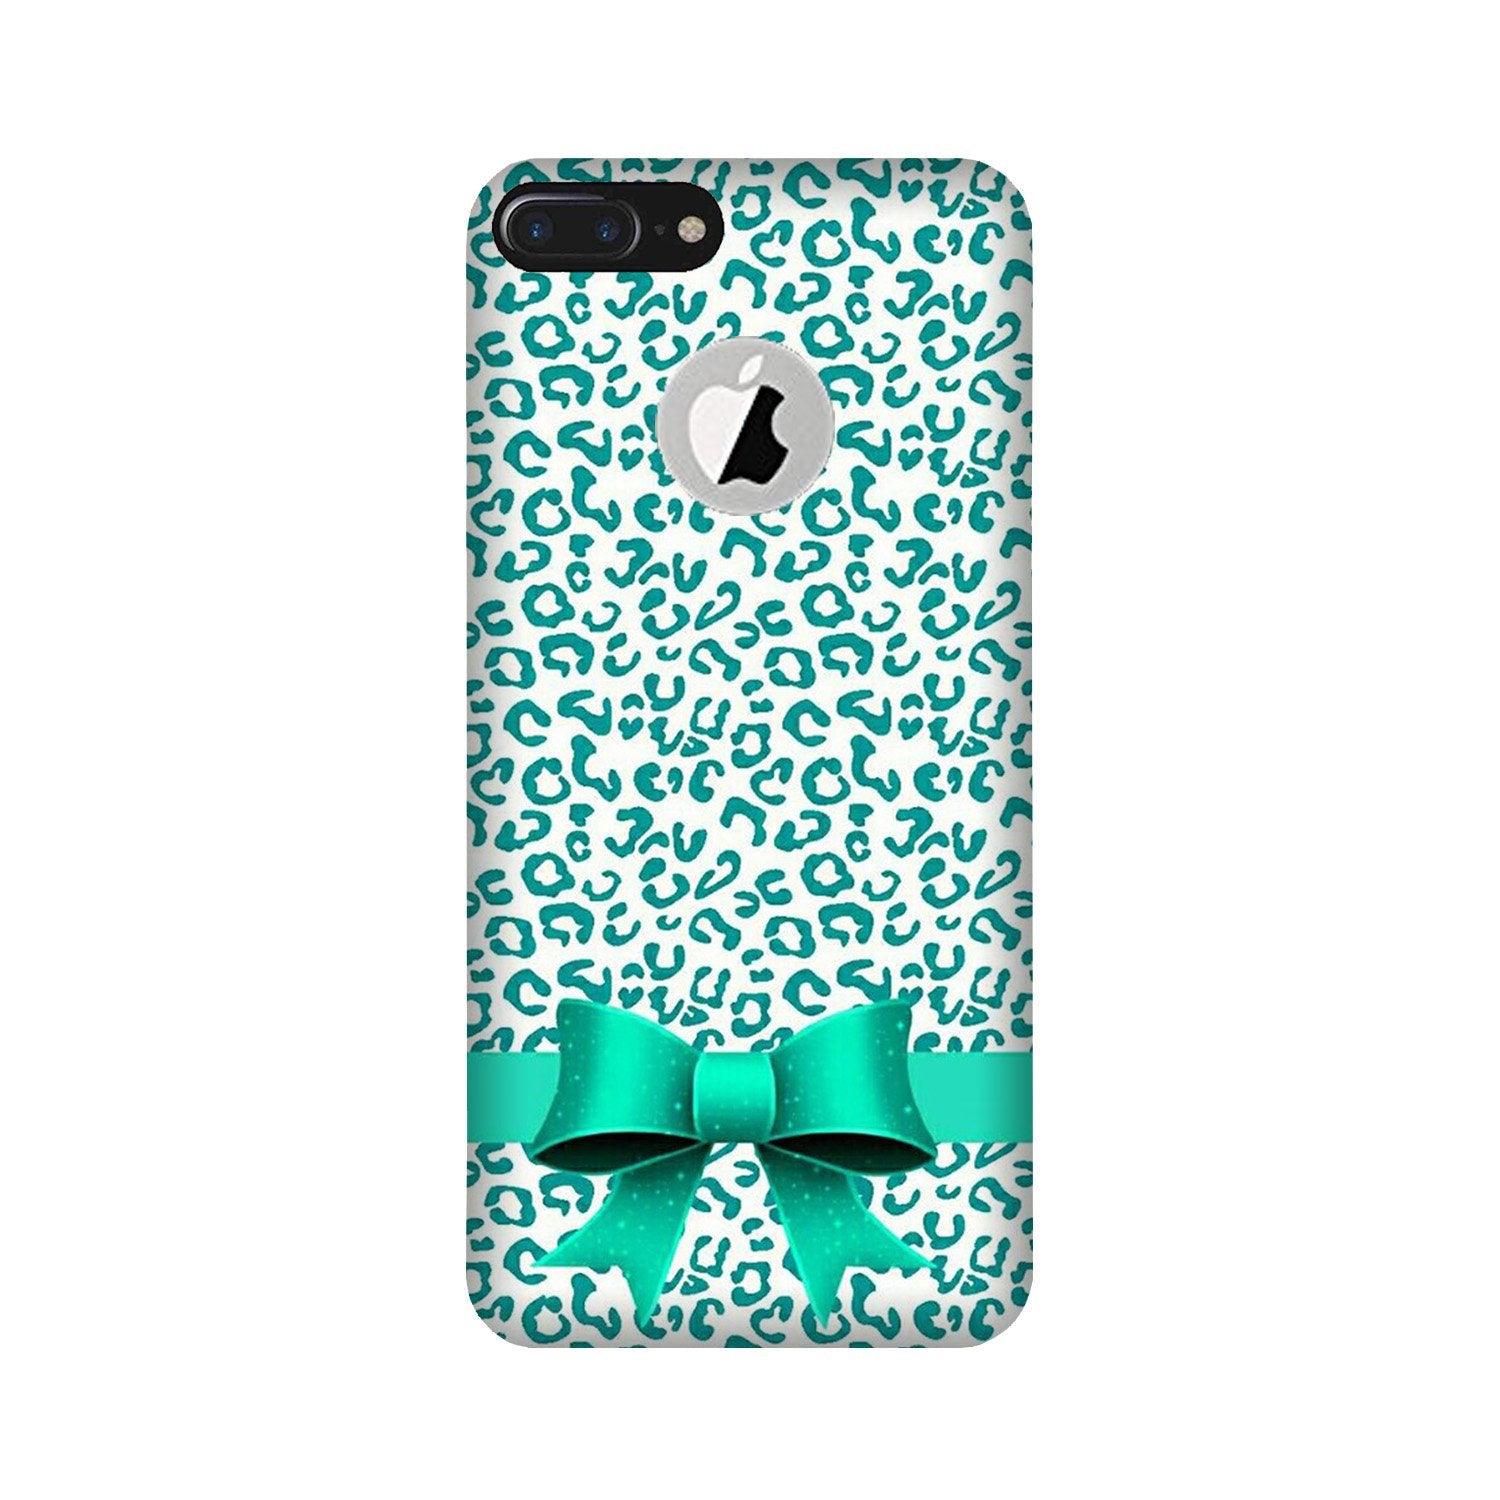 Gift Wrap6 Case for iPhone 7 Plus logo cut